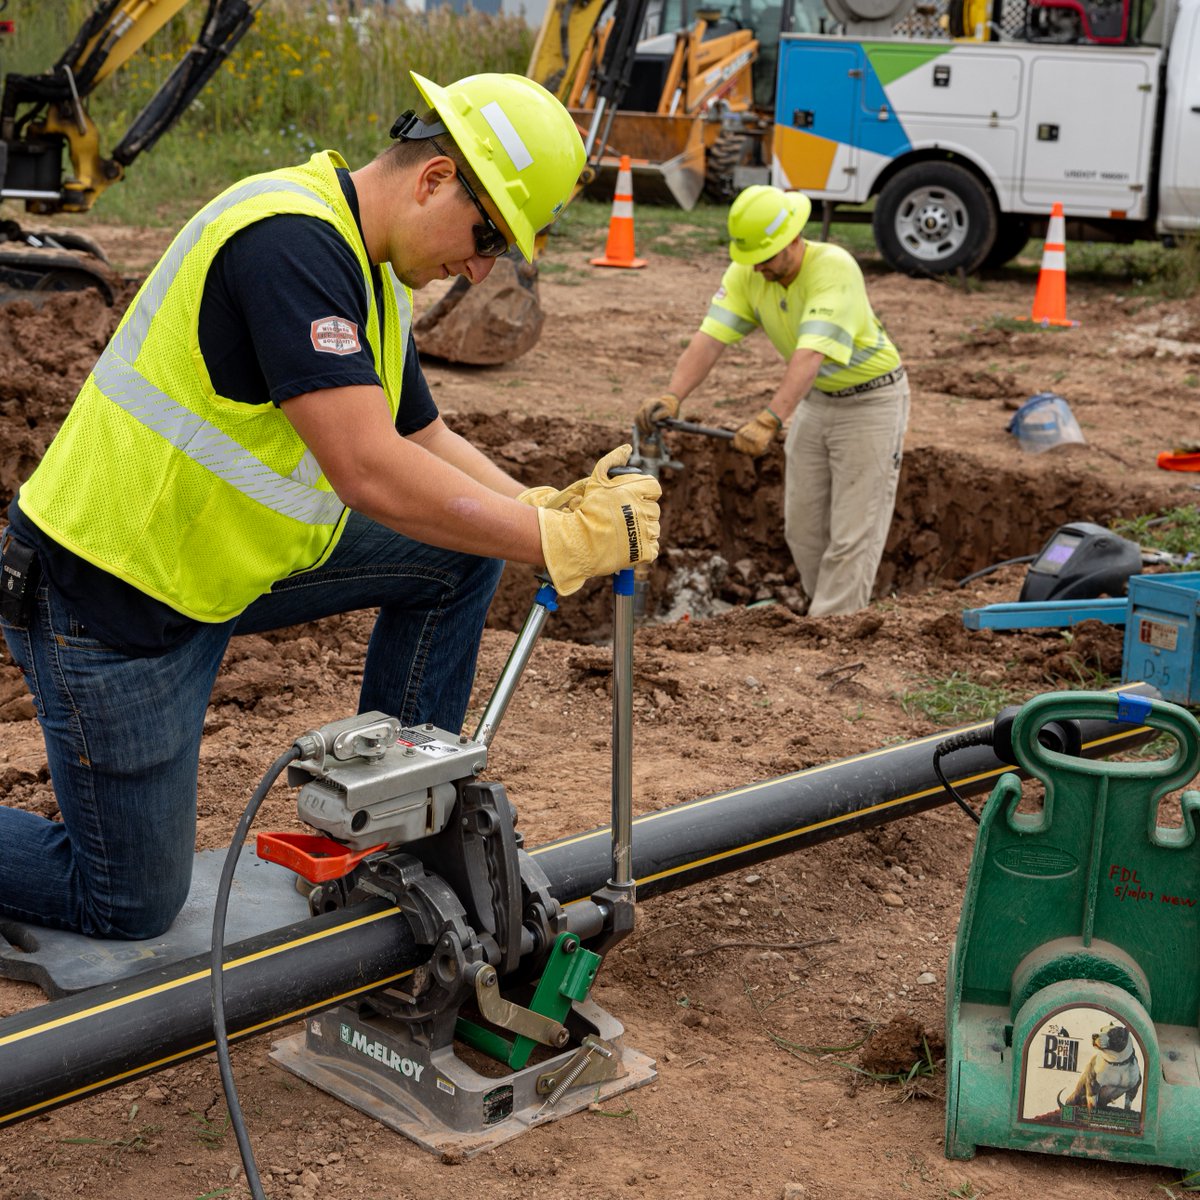 Happy National Gas Workers Appreciation Day! Our natural gas workers are invaluable members of our workforce, making sure our customers and communities are safe and have access to natural gas to heat their homes. Celebrate them with us today!